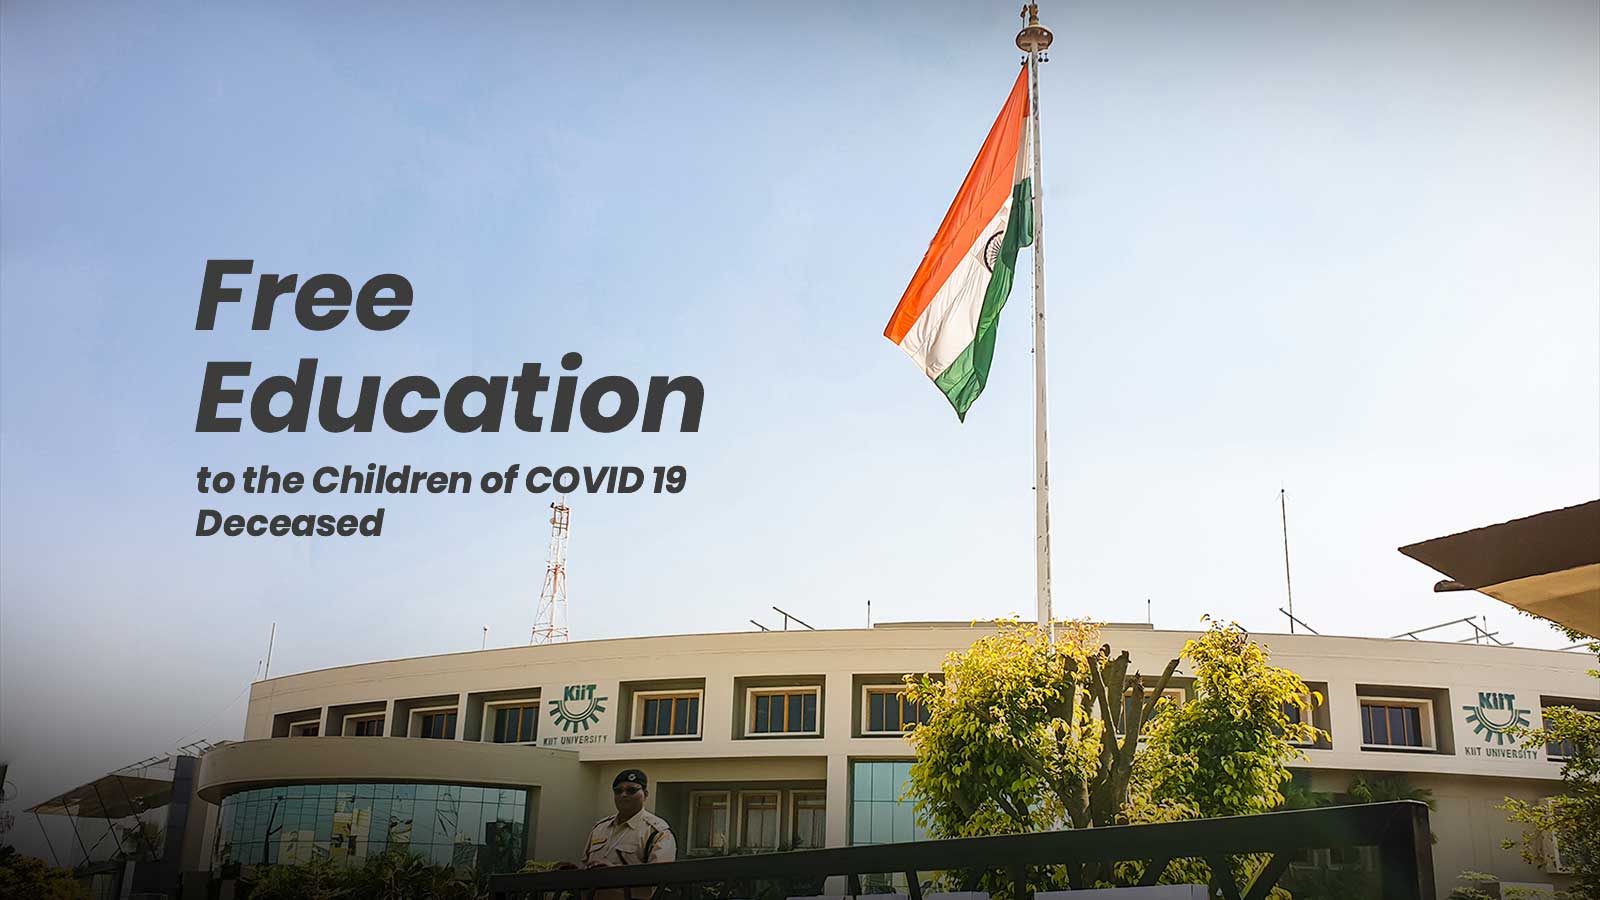 KIIT to provide free Education to the children of COVID 19 deceased